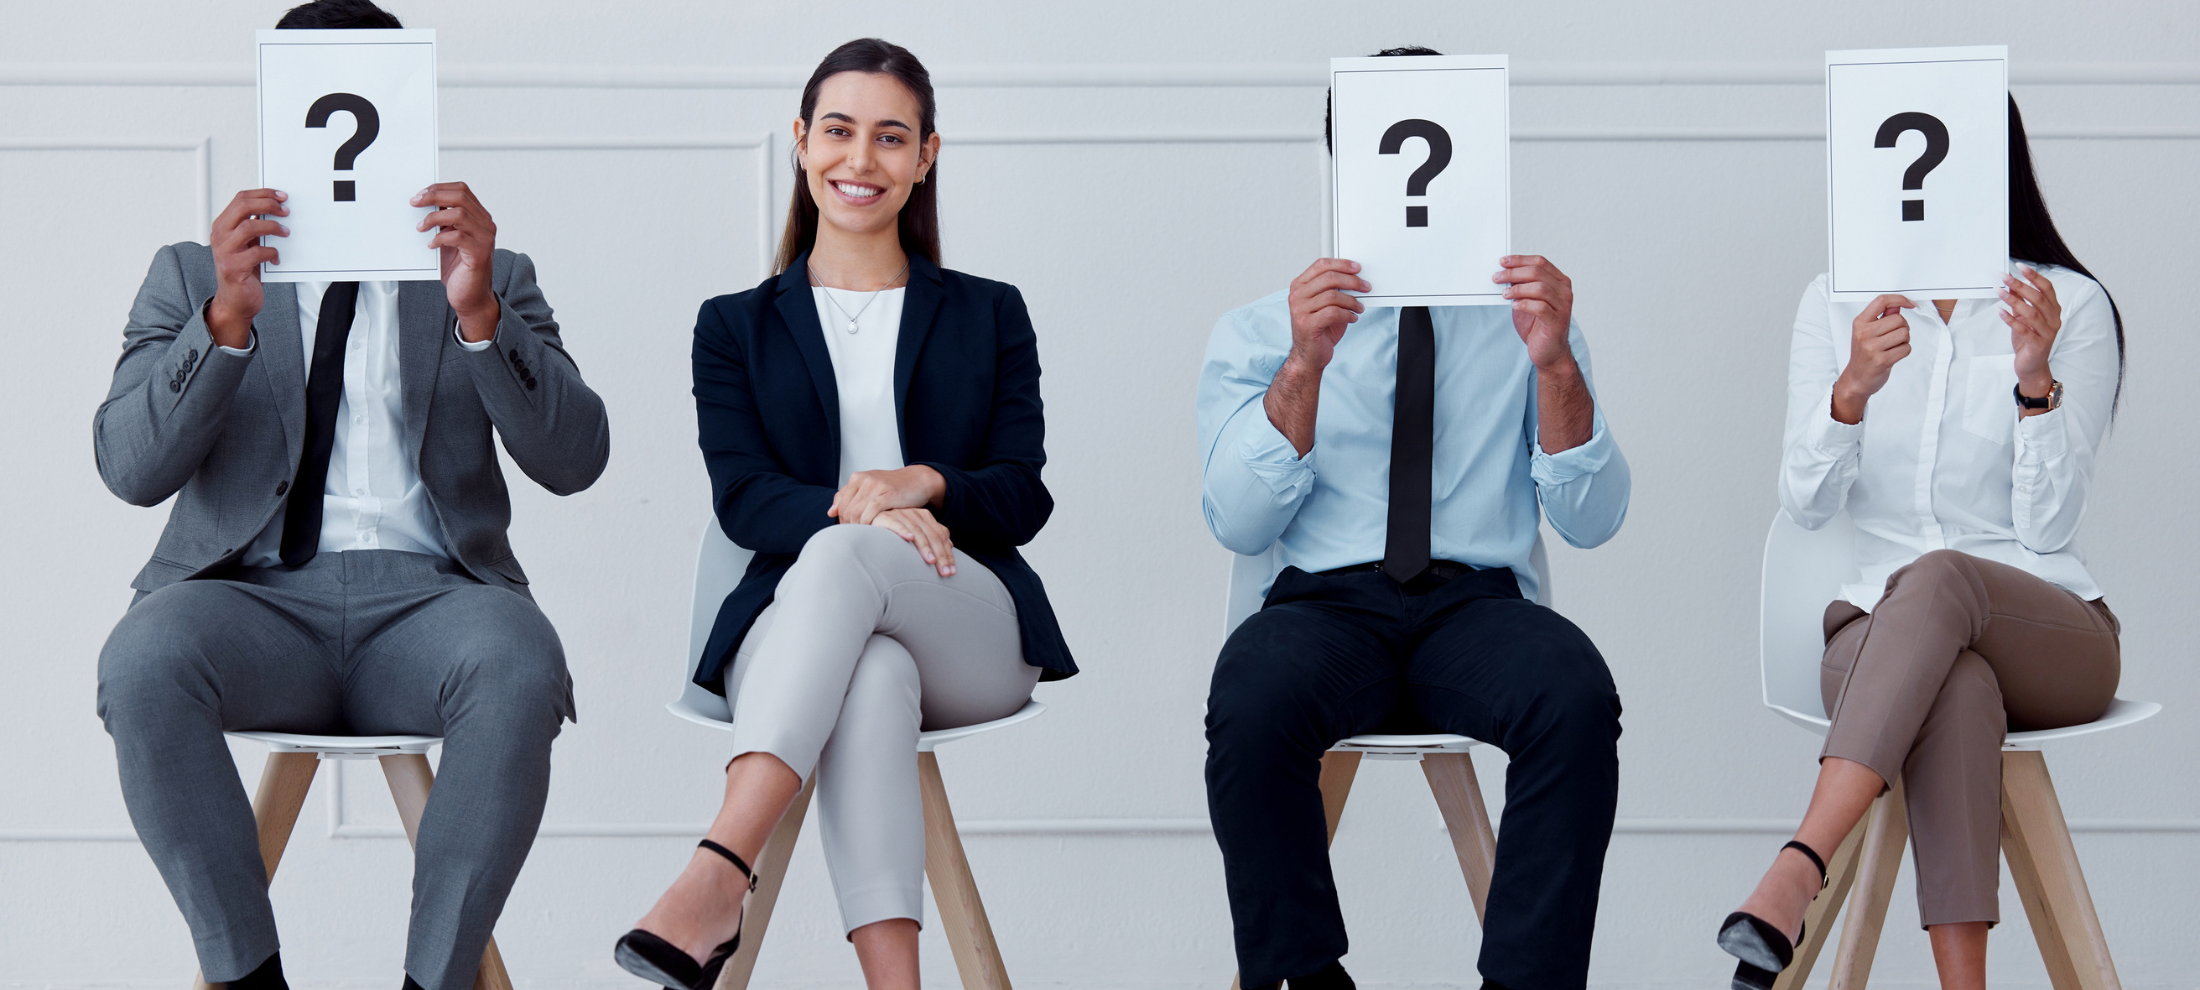 Unlock the Secrets: 6 Powerful Analytical Interview Questions You Need to Ask